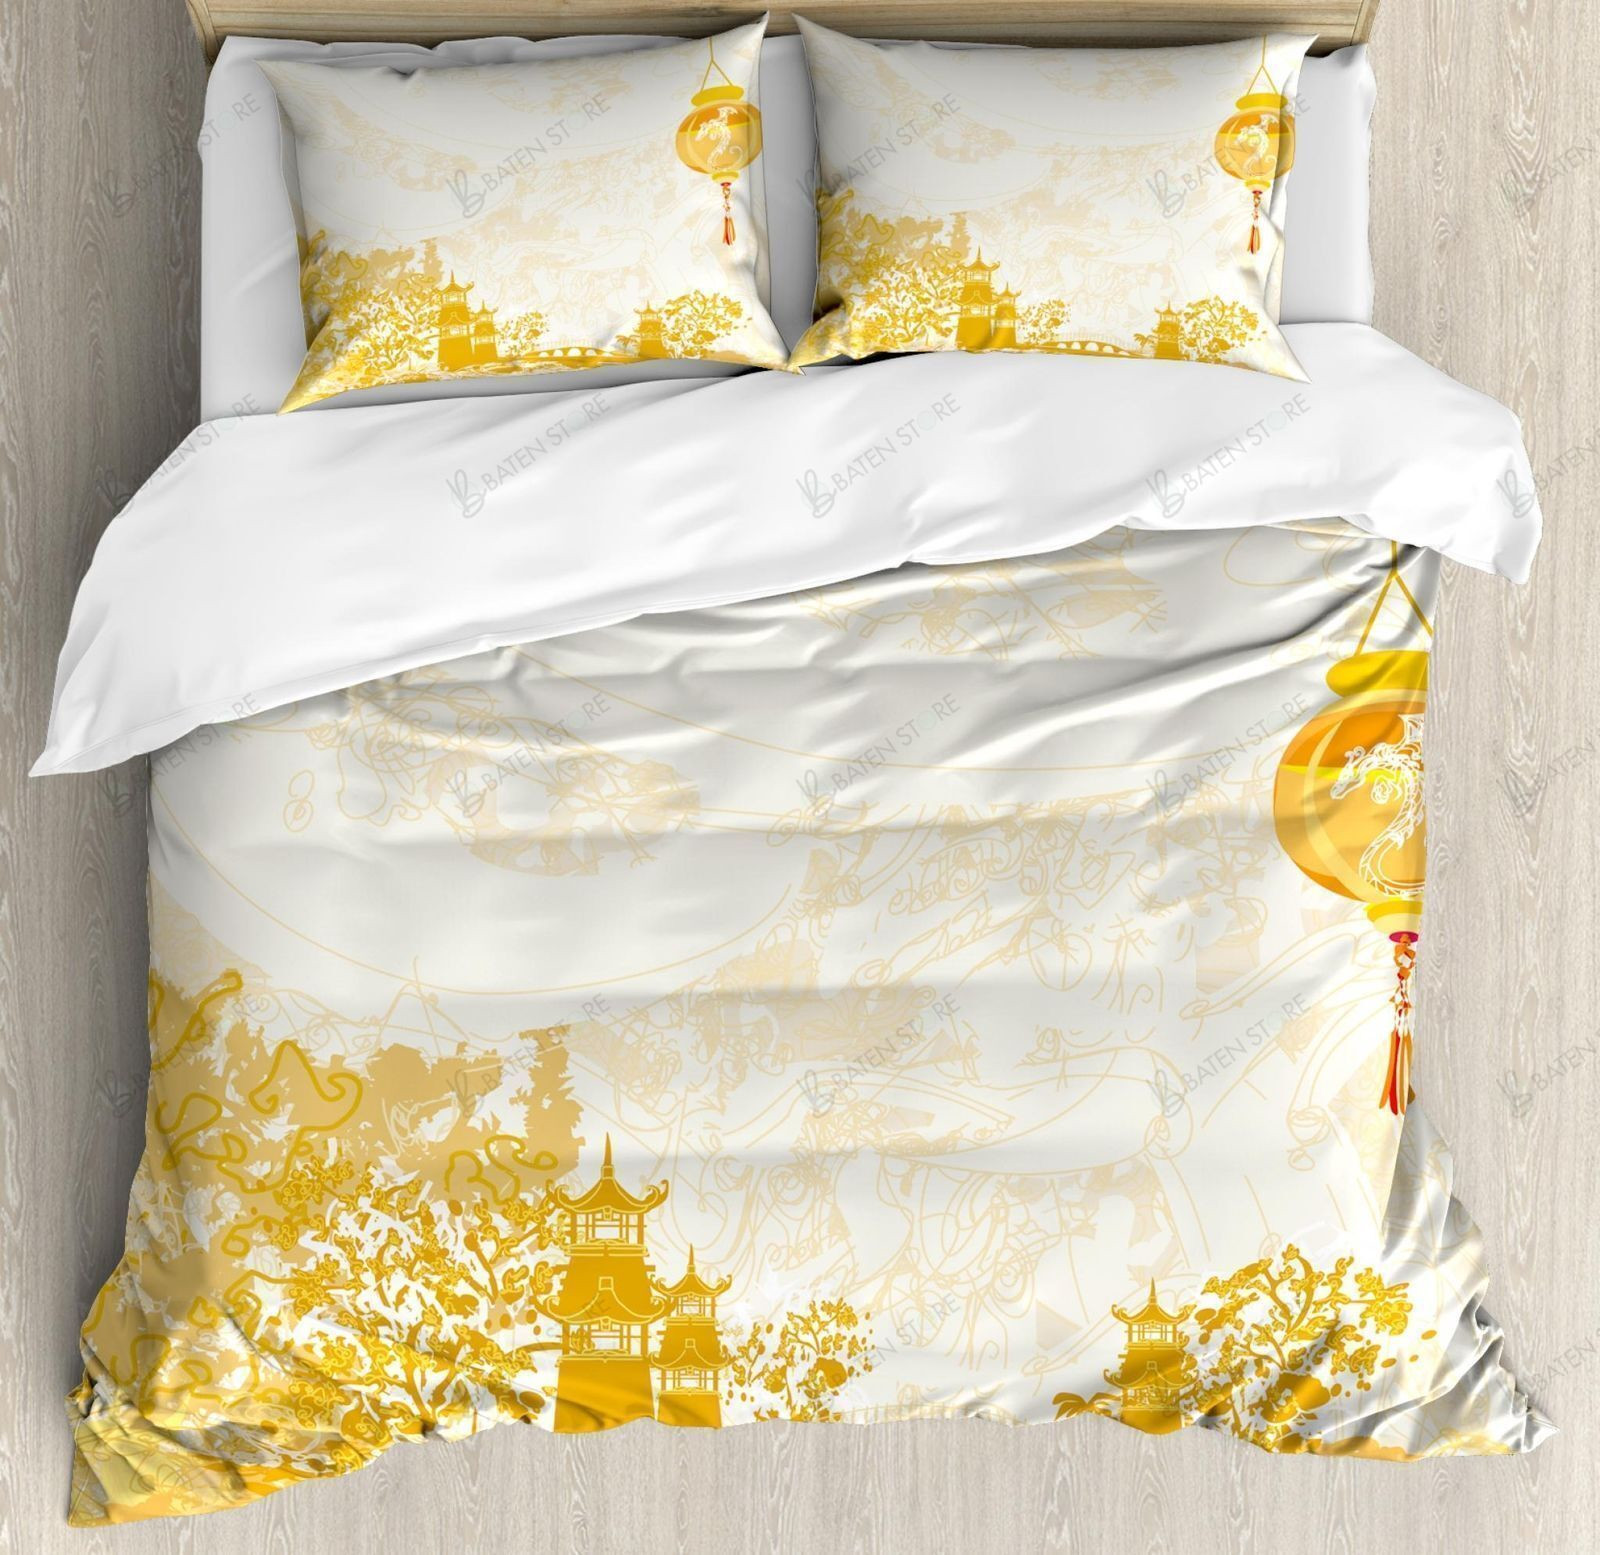 yellow lantern bed sheets duvet cover bedding set perfect gifts for birthdays christmas and thanksgiving jgurc